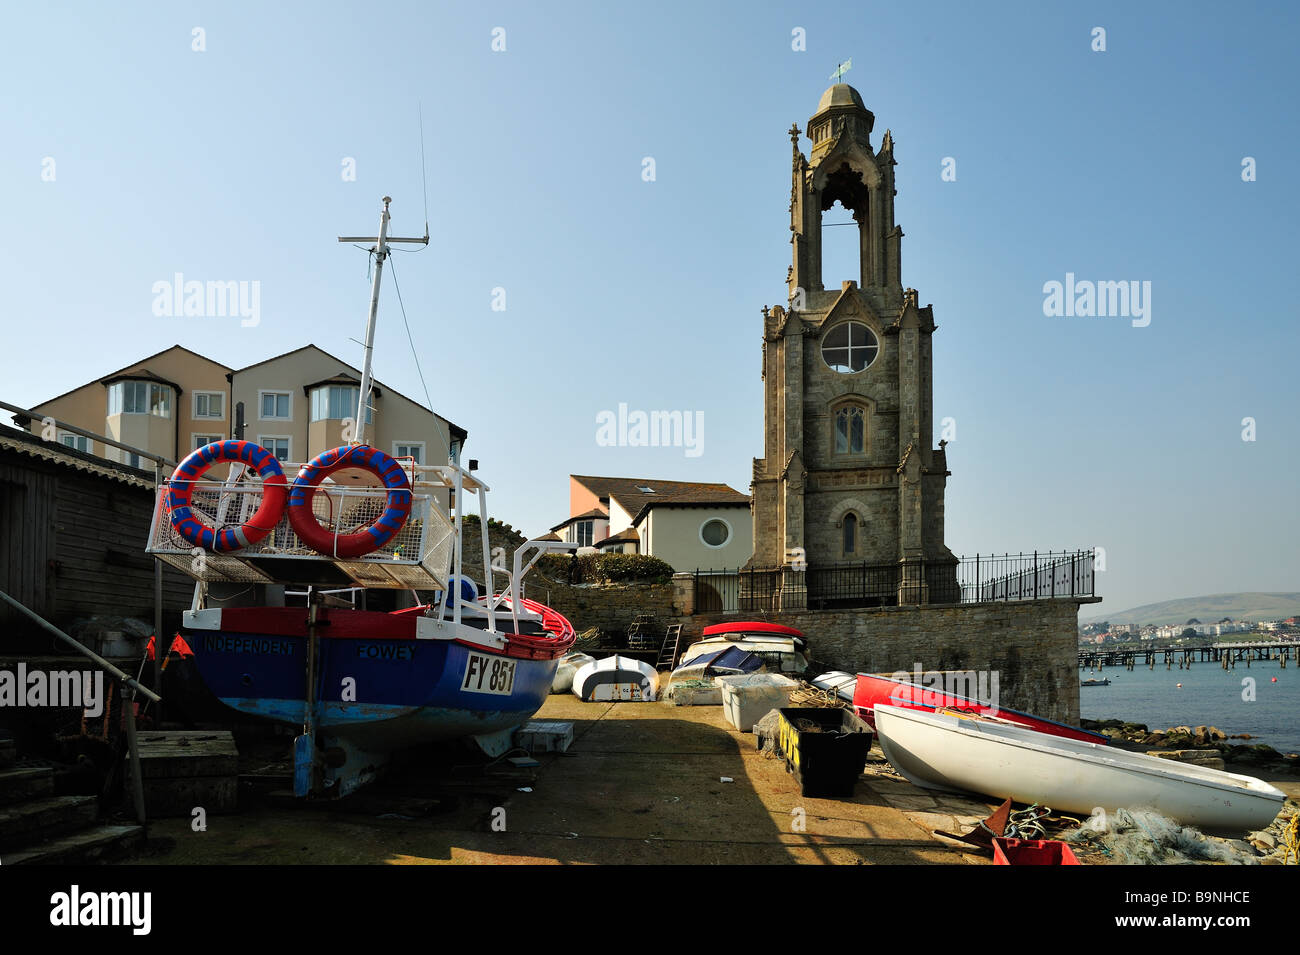 SWANAGE, DORSET, UK - MARCH 21, 2009:  Boats pulled up on the beach in front of the Wellington Clock Stock Photo